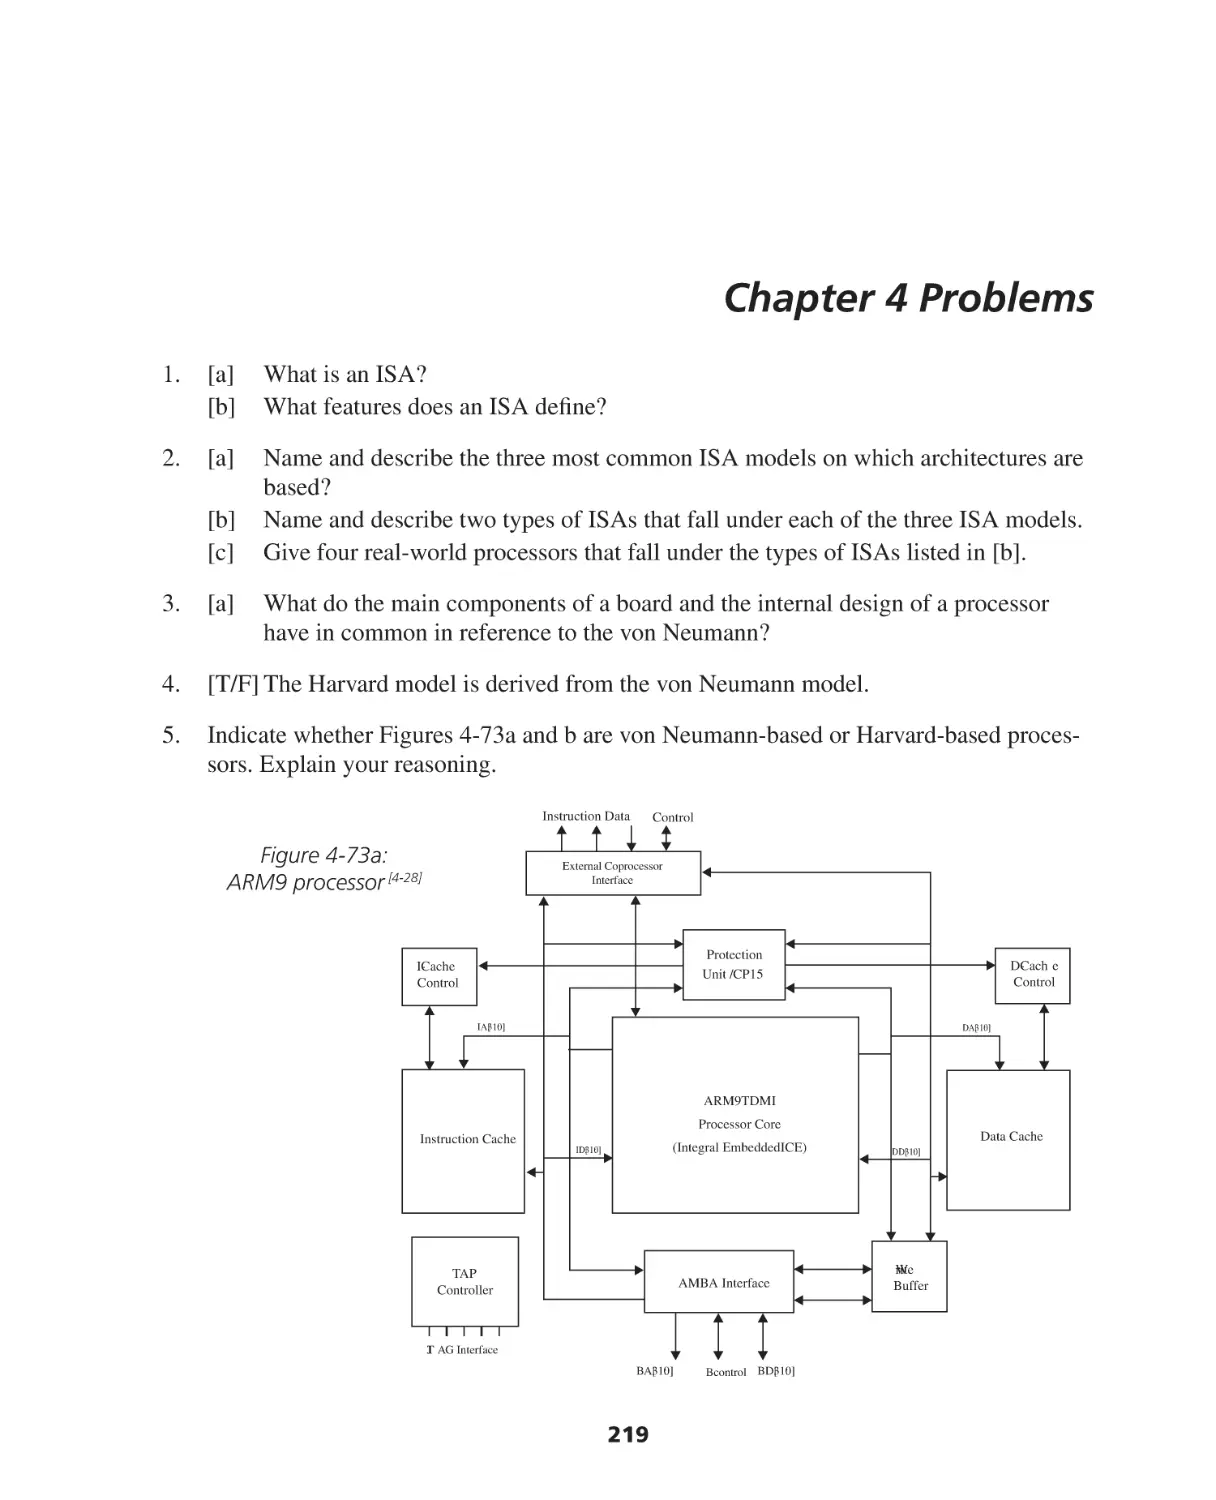 Chapter 4 Problems